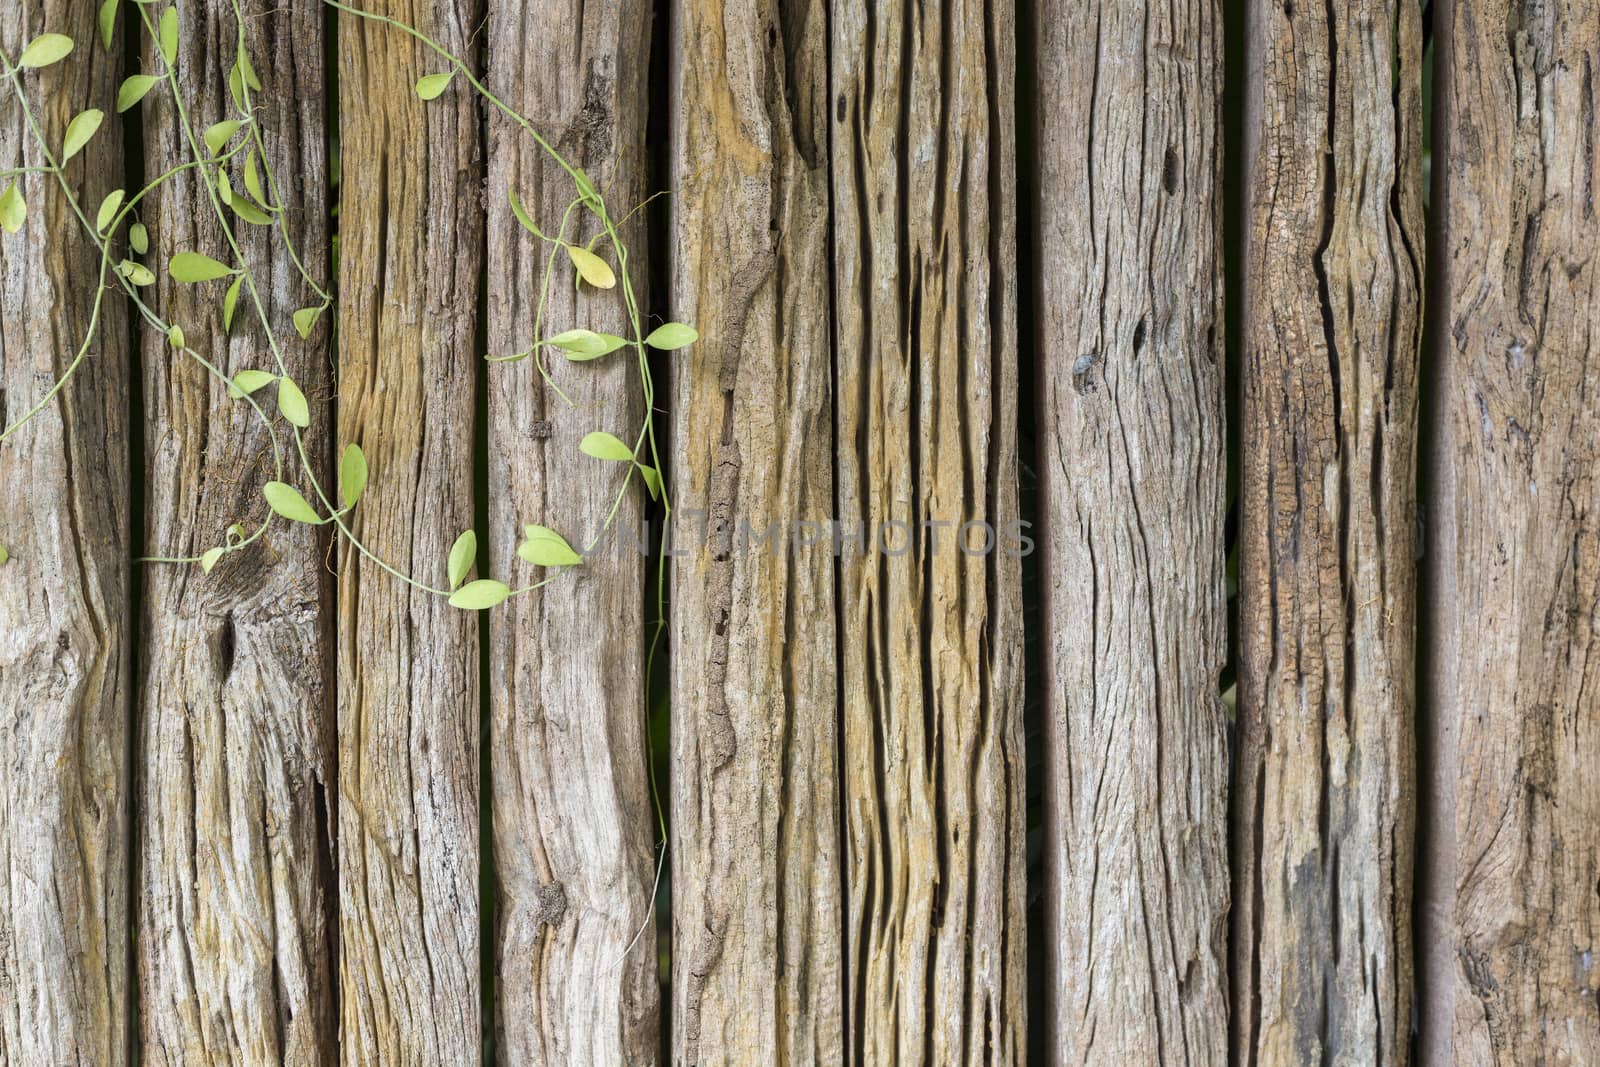 Old wood planks wall texture background